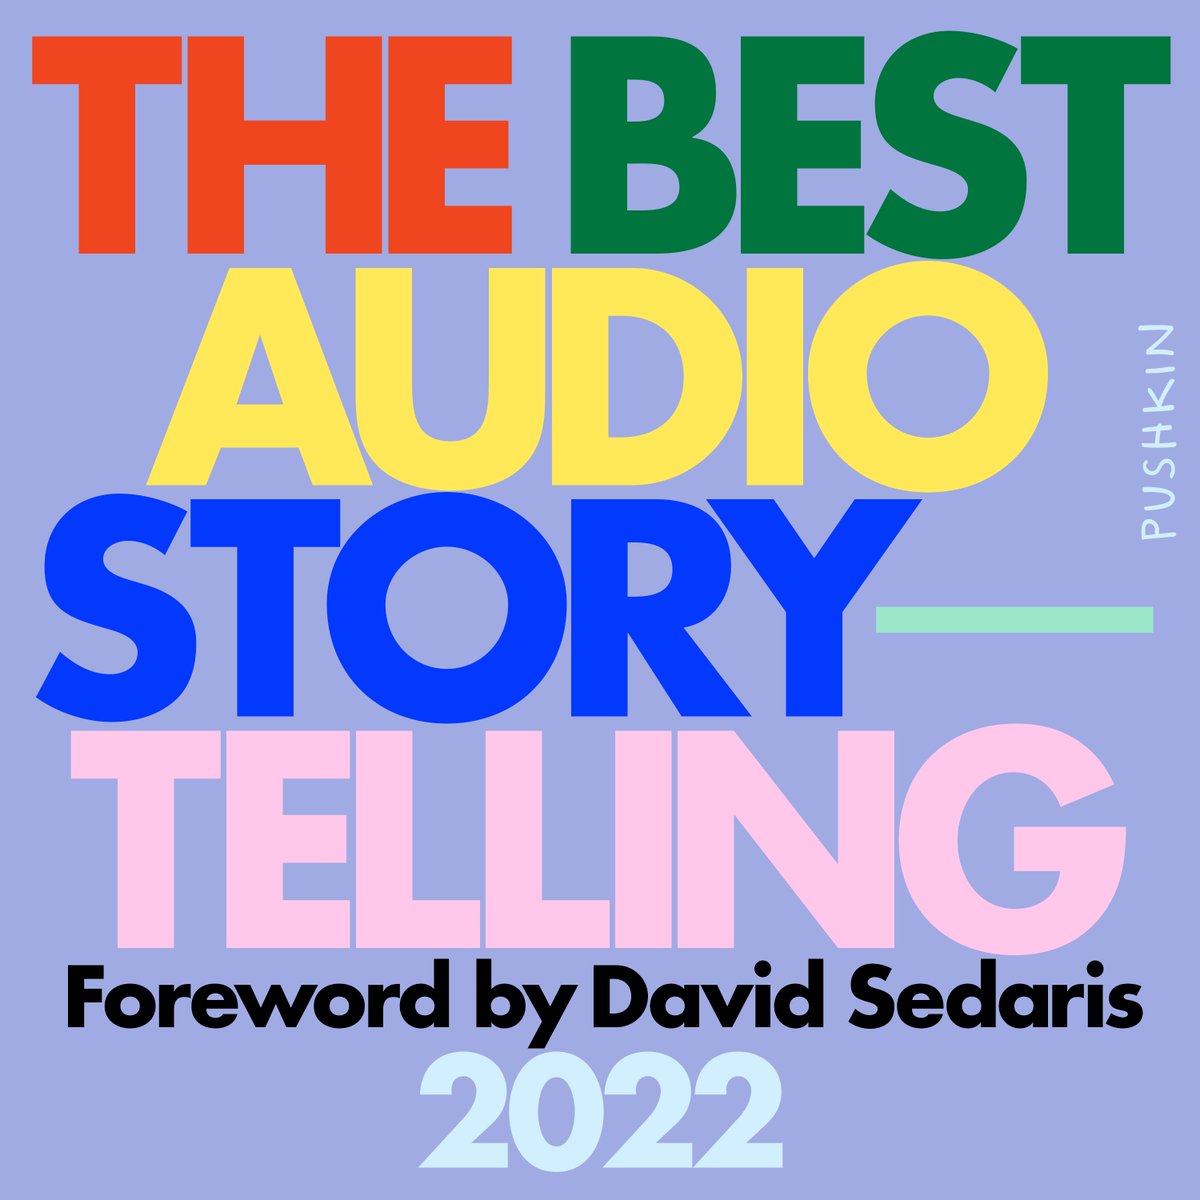 To celebrate the range of our chosen medium, @pushkinpods created THE BEST AUDIO STORYTELLING: 2022, an audio collection that gathers the most innovative podcast episodes and radio stories of the past year. And they've announced our Planet Money Records series is a winner!🥳🥳🥳